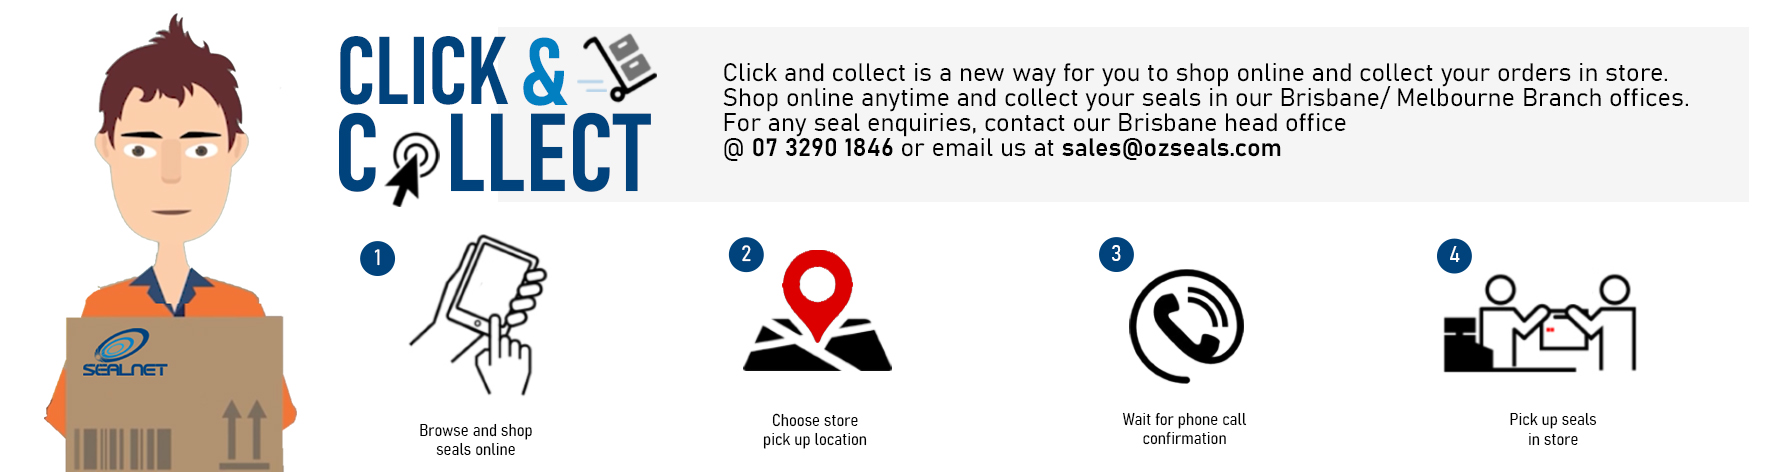 Sealnet Shop Click and Collect